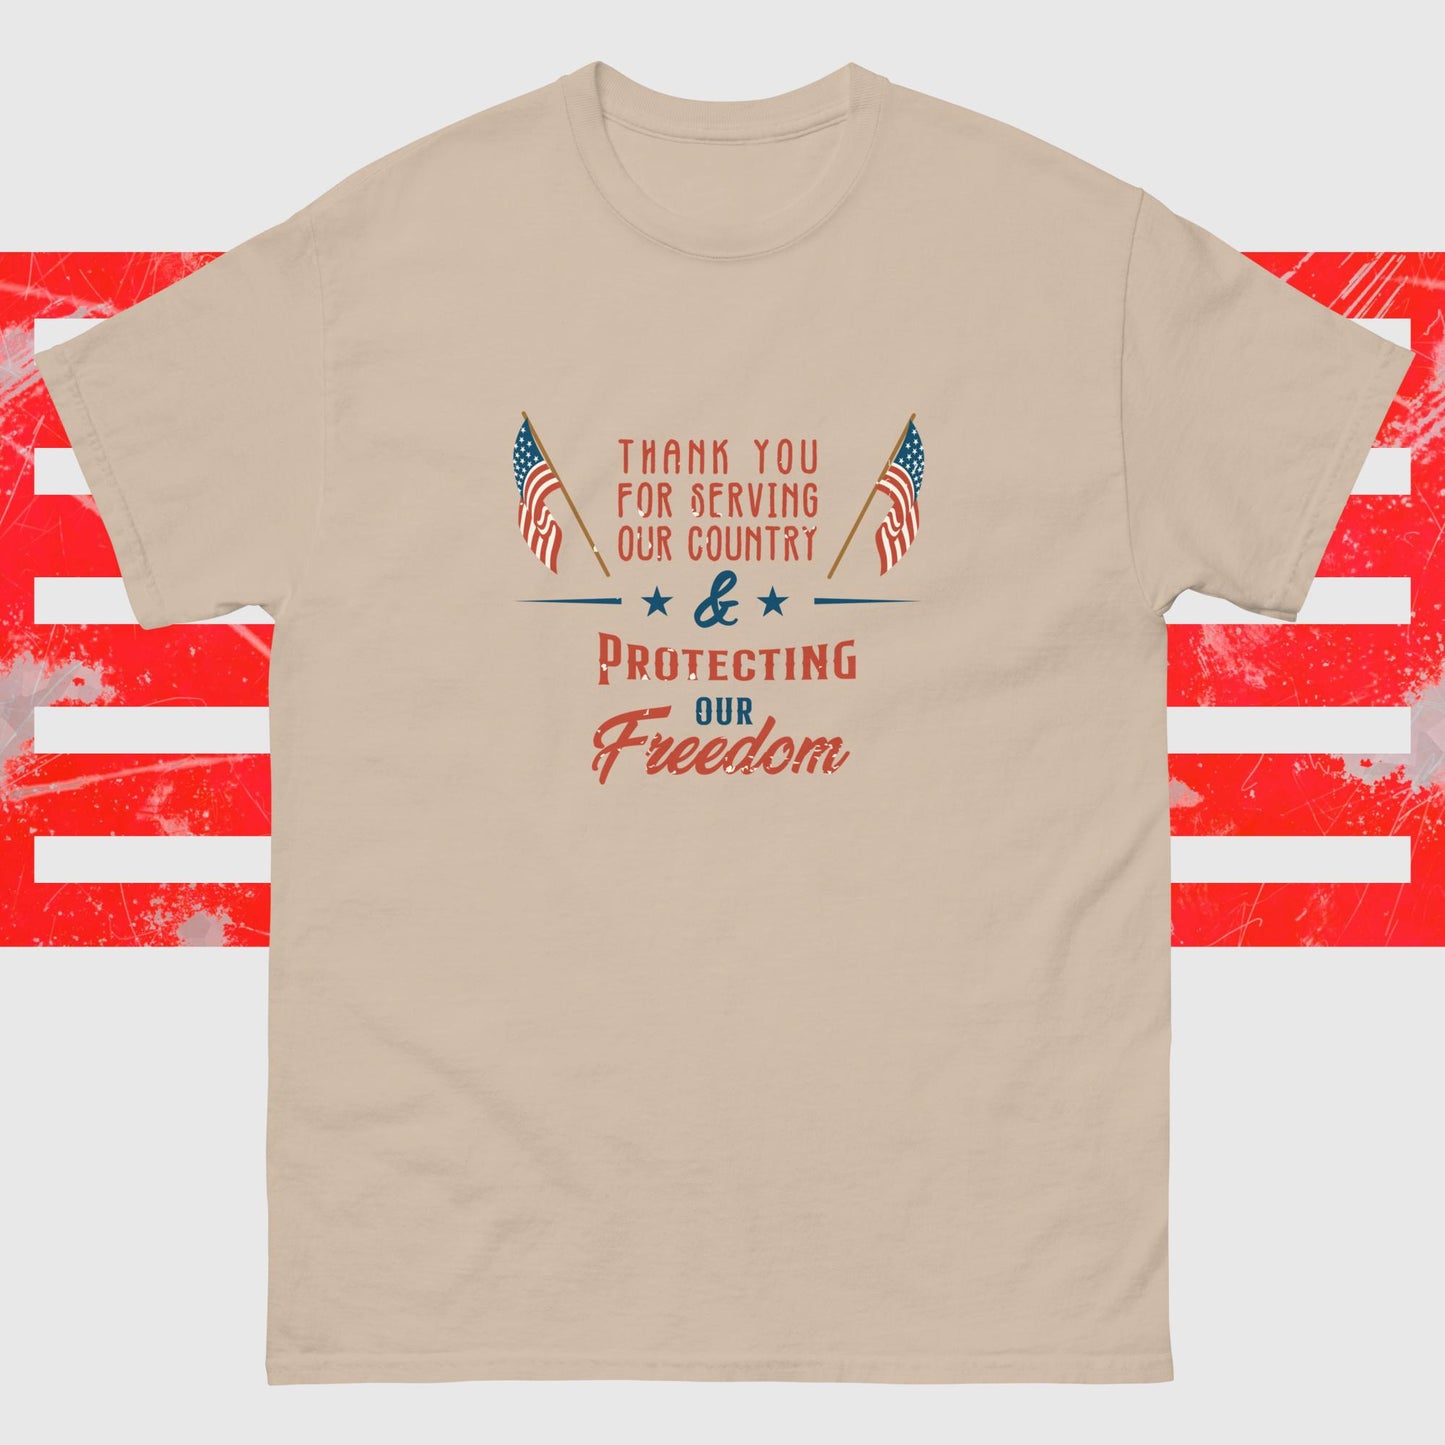 PATRIOTIC TEE FOR VETERANS DAY PROTECTING FREEDOM SAND FRONT - www.firstamericanstore.com